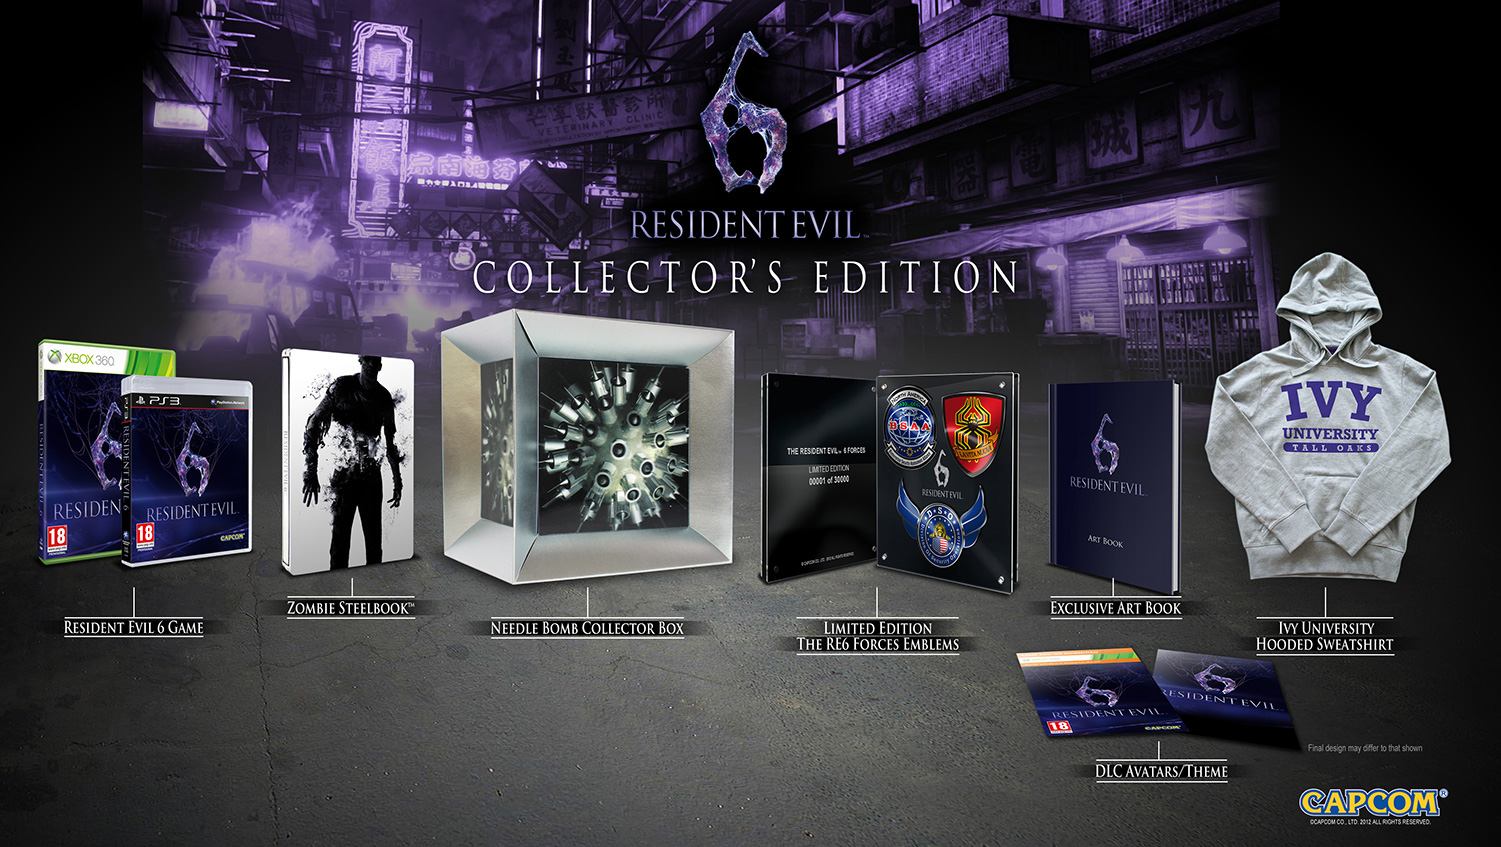 resident evil 6 collectors edition - Resident Evil 6: Collectors Edition enthüllt